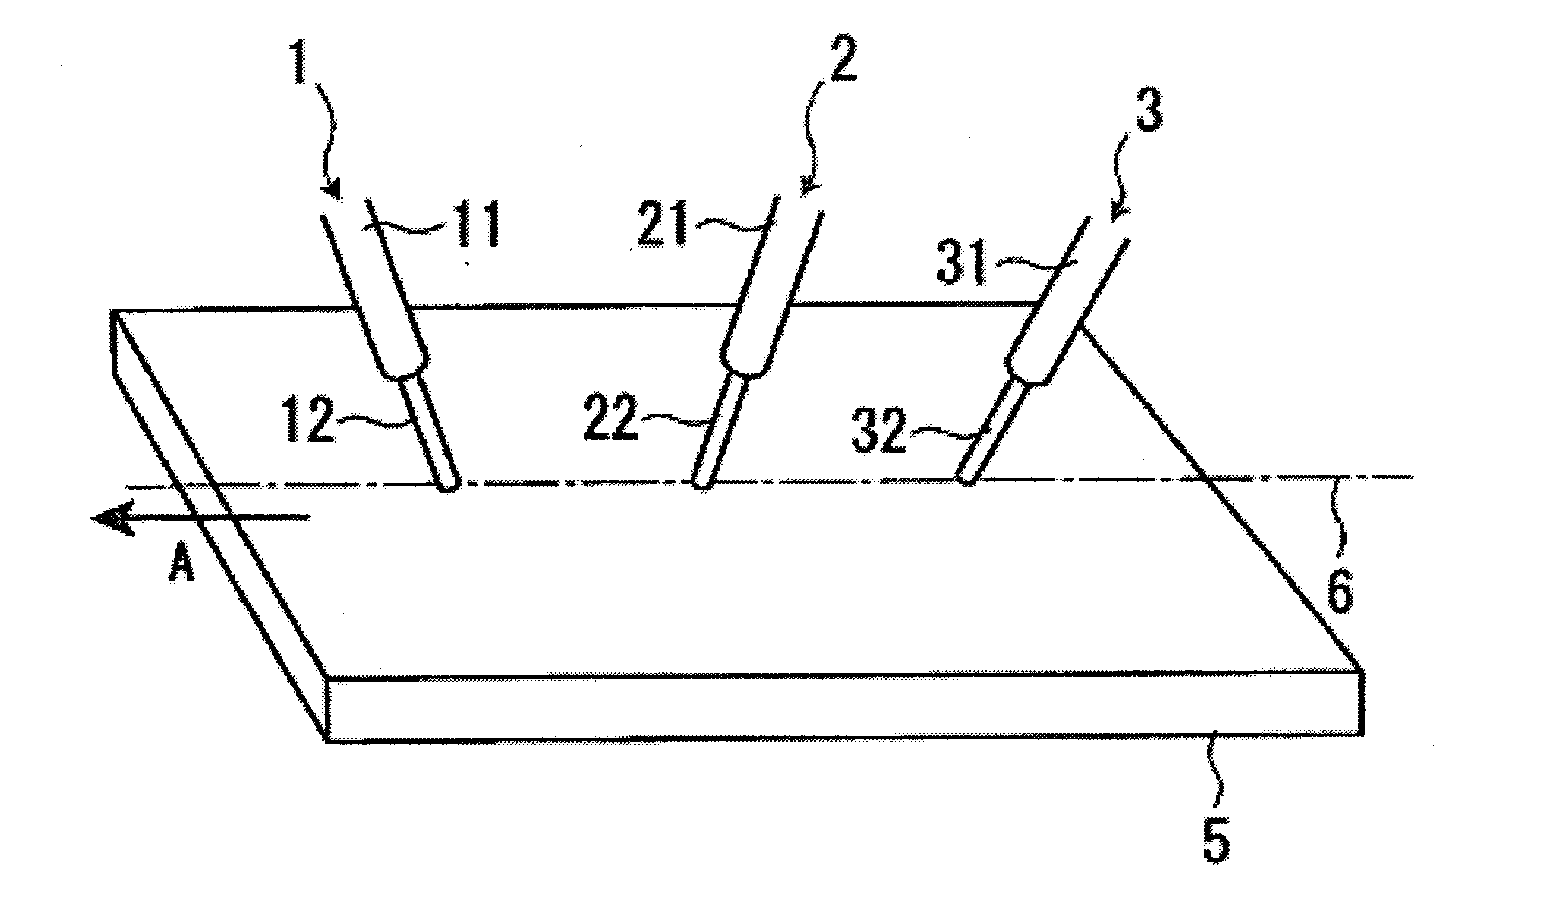 Submerged arc welding method for steel plate